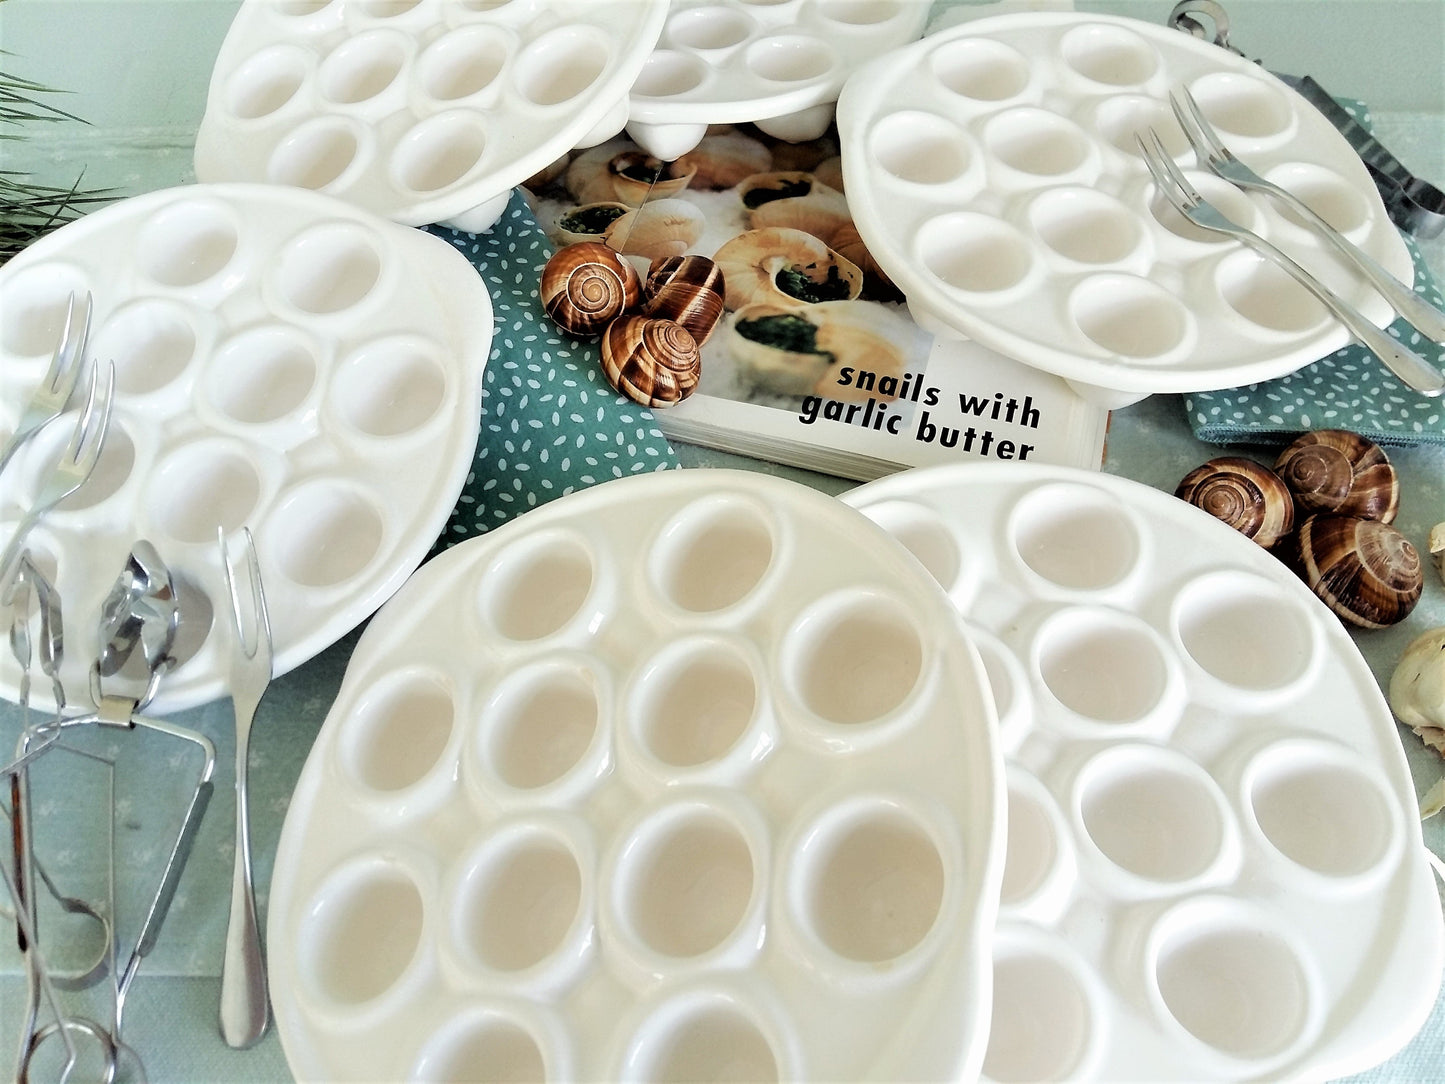 SIX Large Escargot Dishes, for 12 Snails from Tiggy & Pip - €220.00! Shop now at Tiggy and Pip